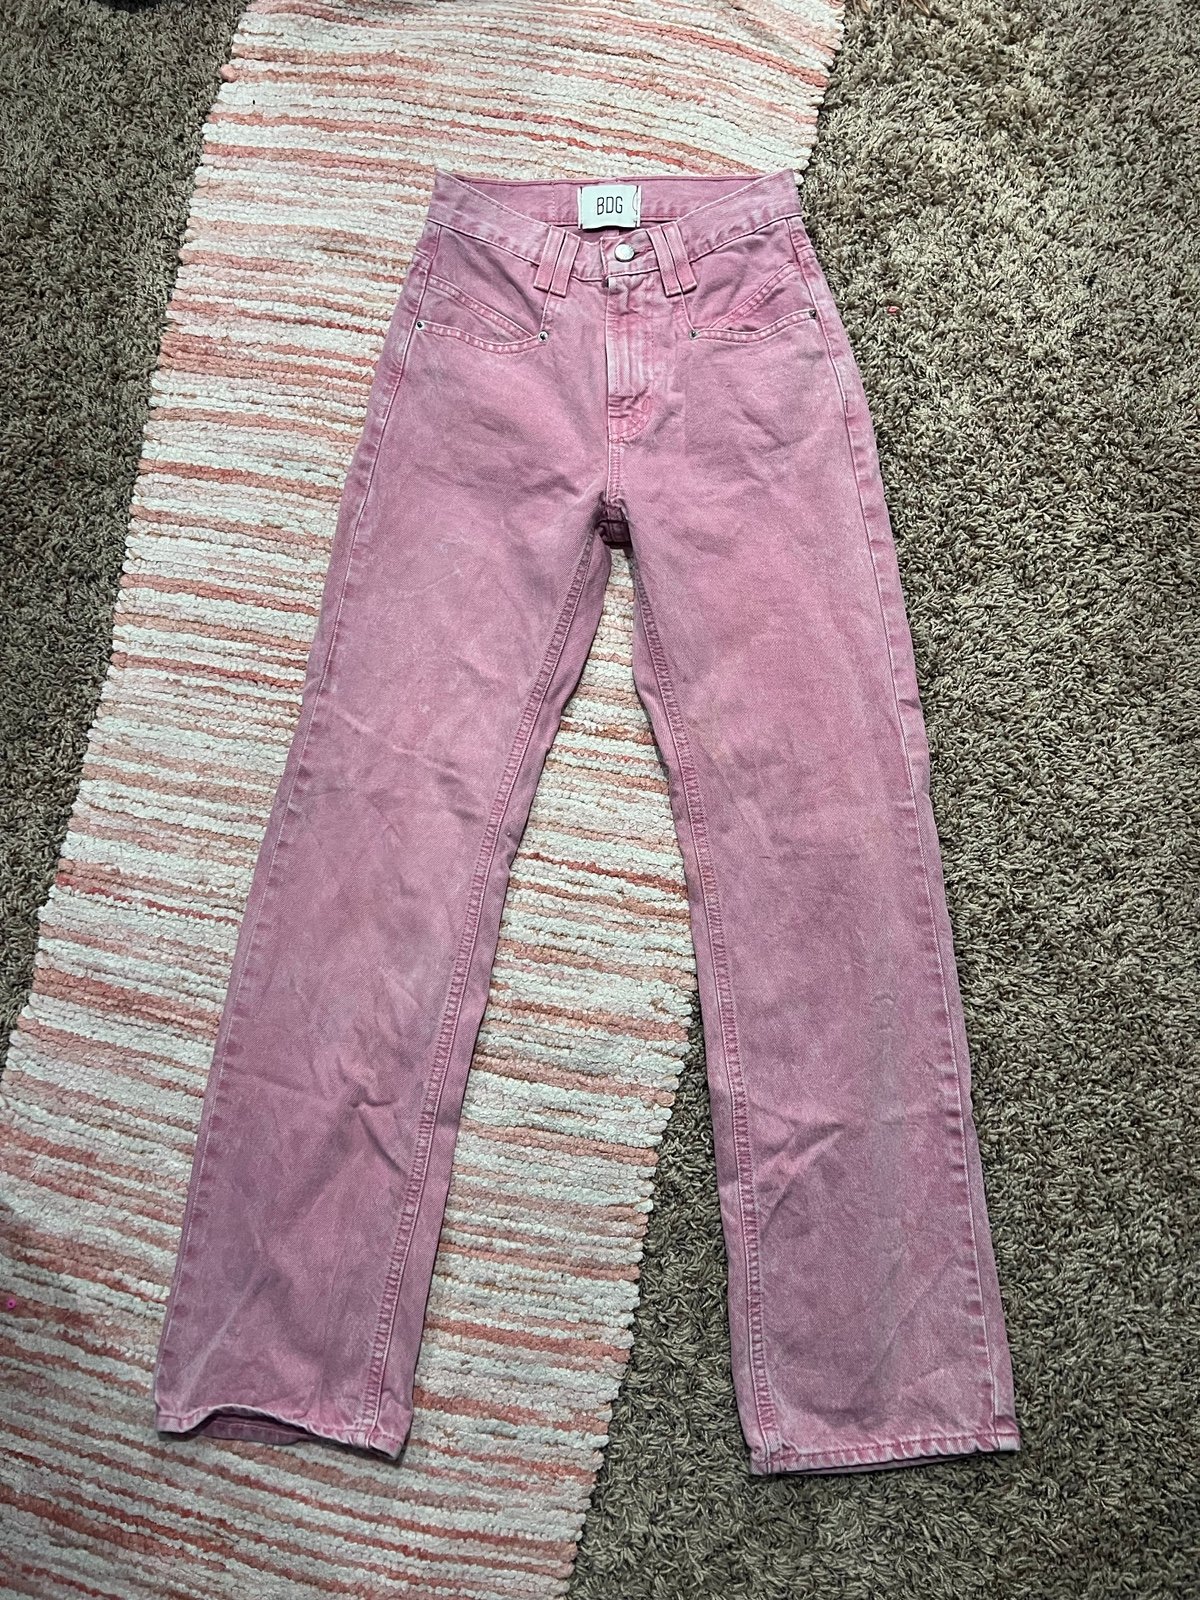 high discount BDG urban outfitter pink jeans size 24 fL